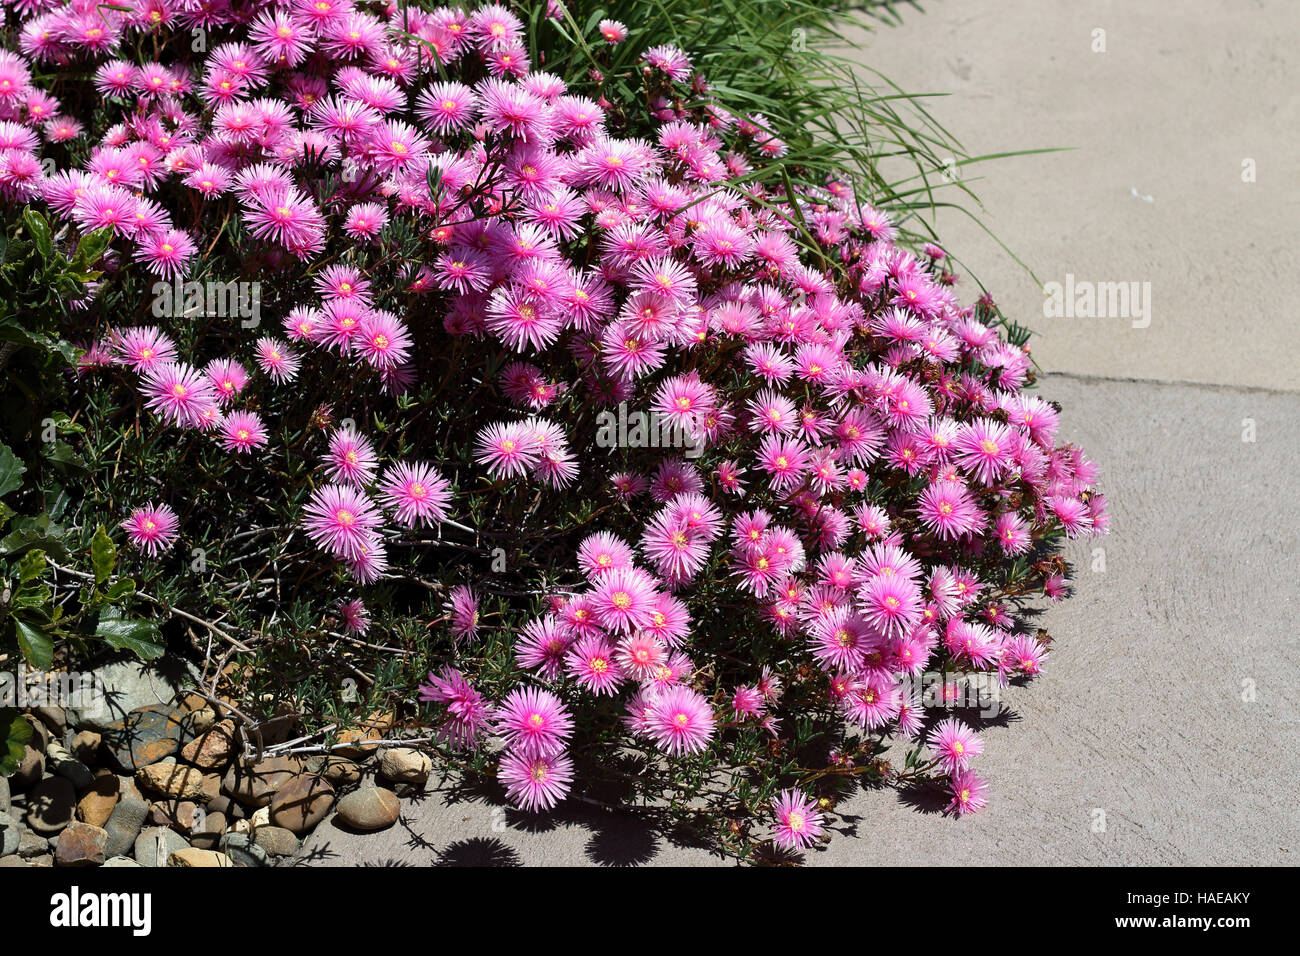 Pink Pig face flowers or Mesembryanthemum , ice plant flowers in full bloom Stock Photo